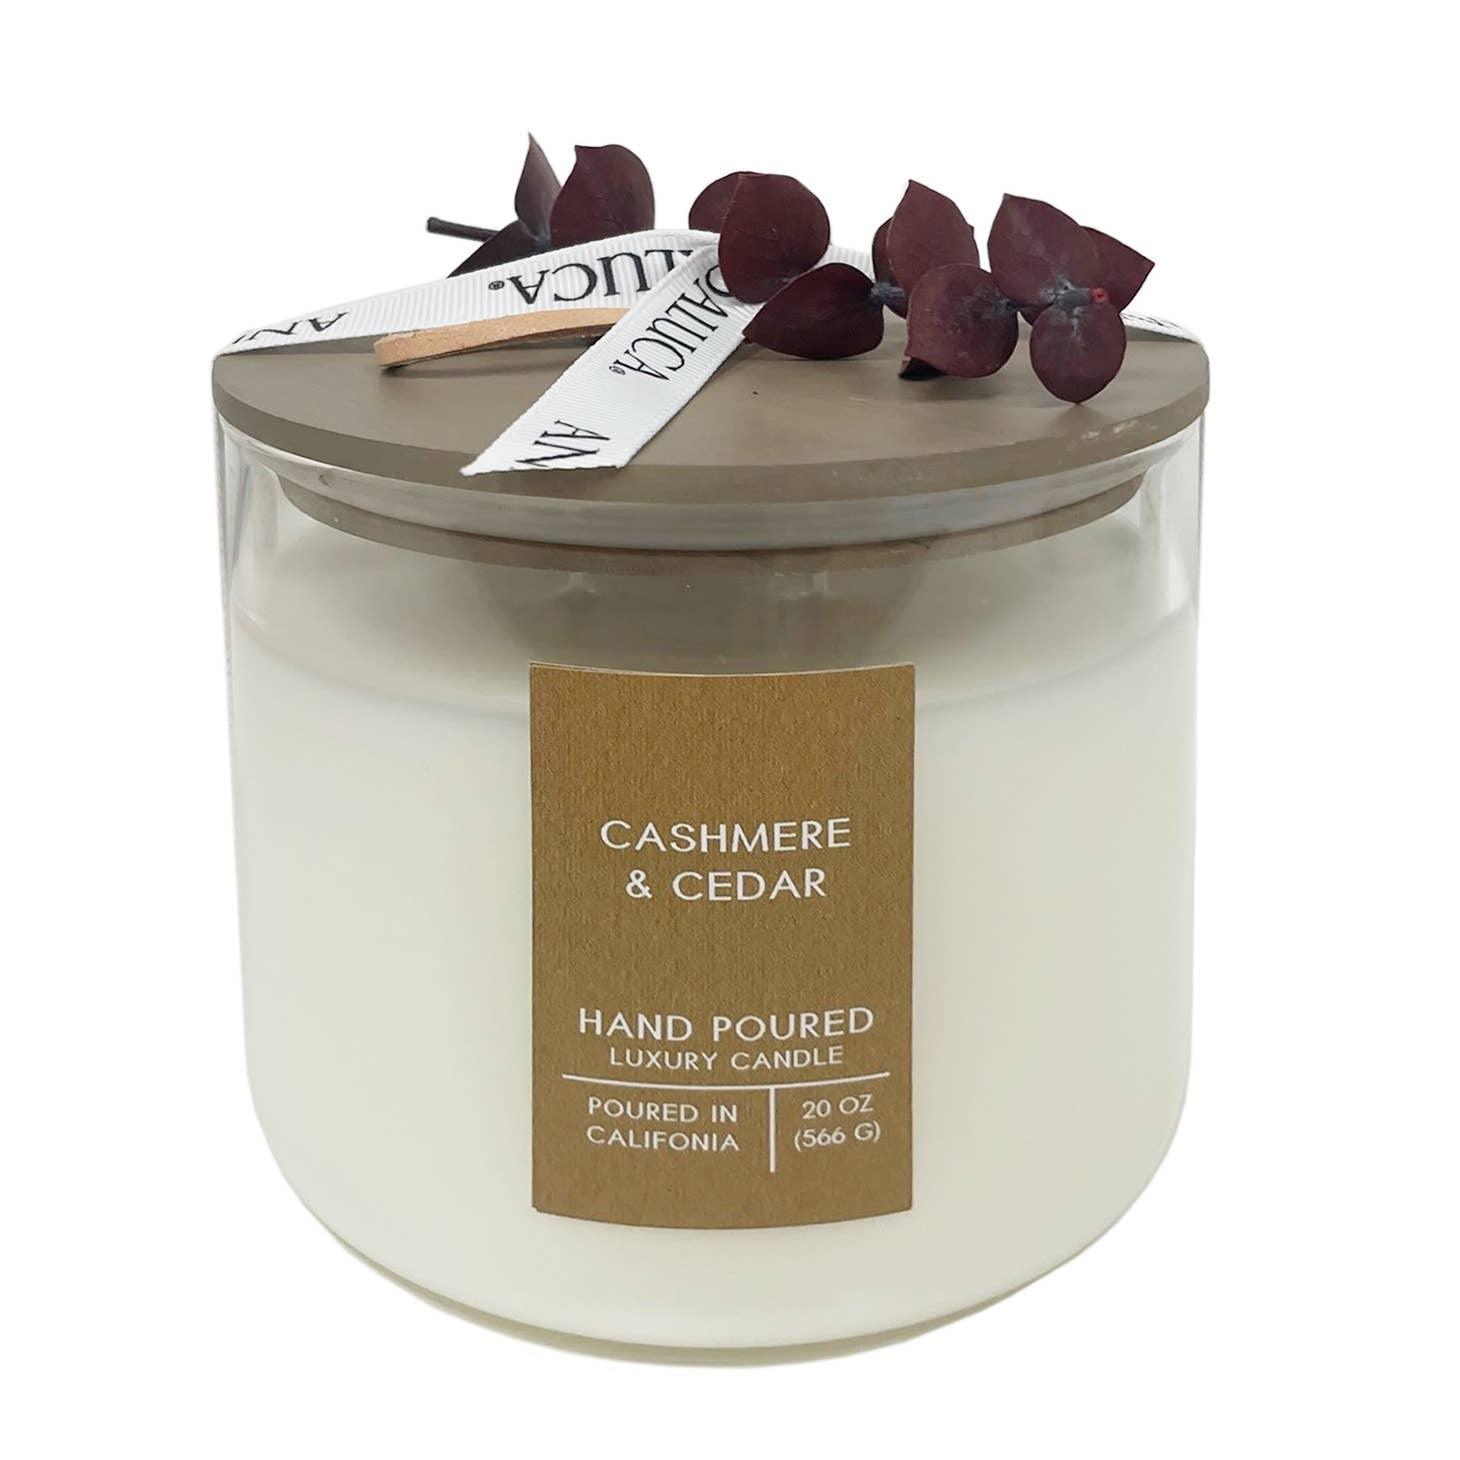 Cashmere & Cedar | 3 Wick Candle - DWELL by CM